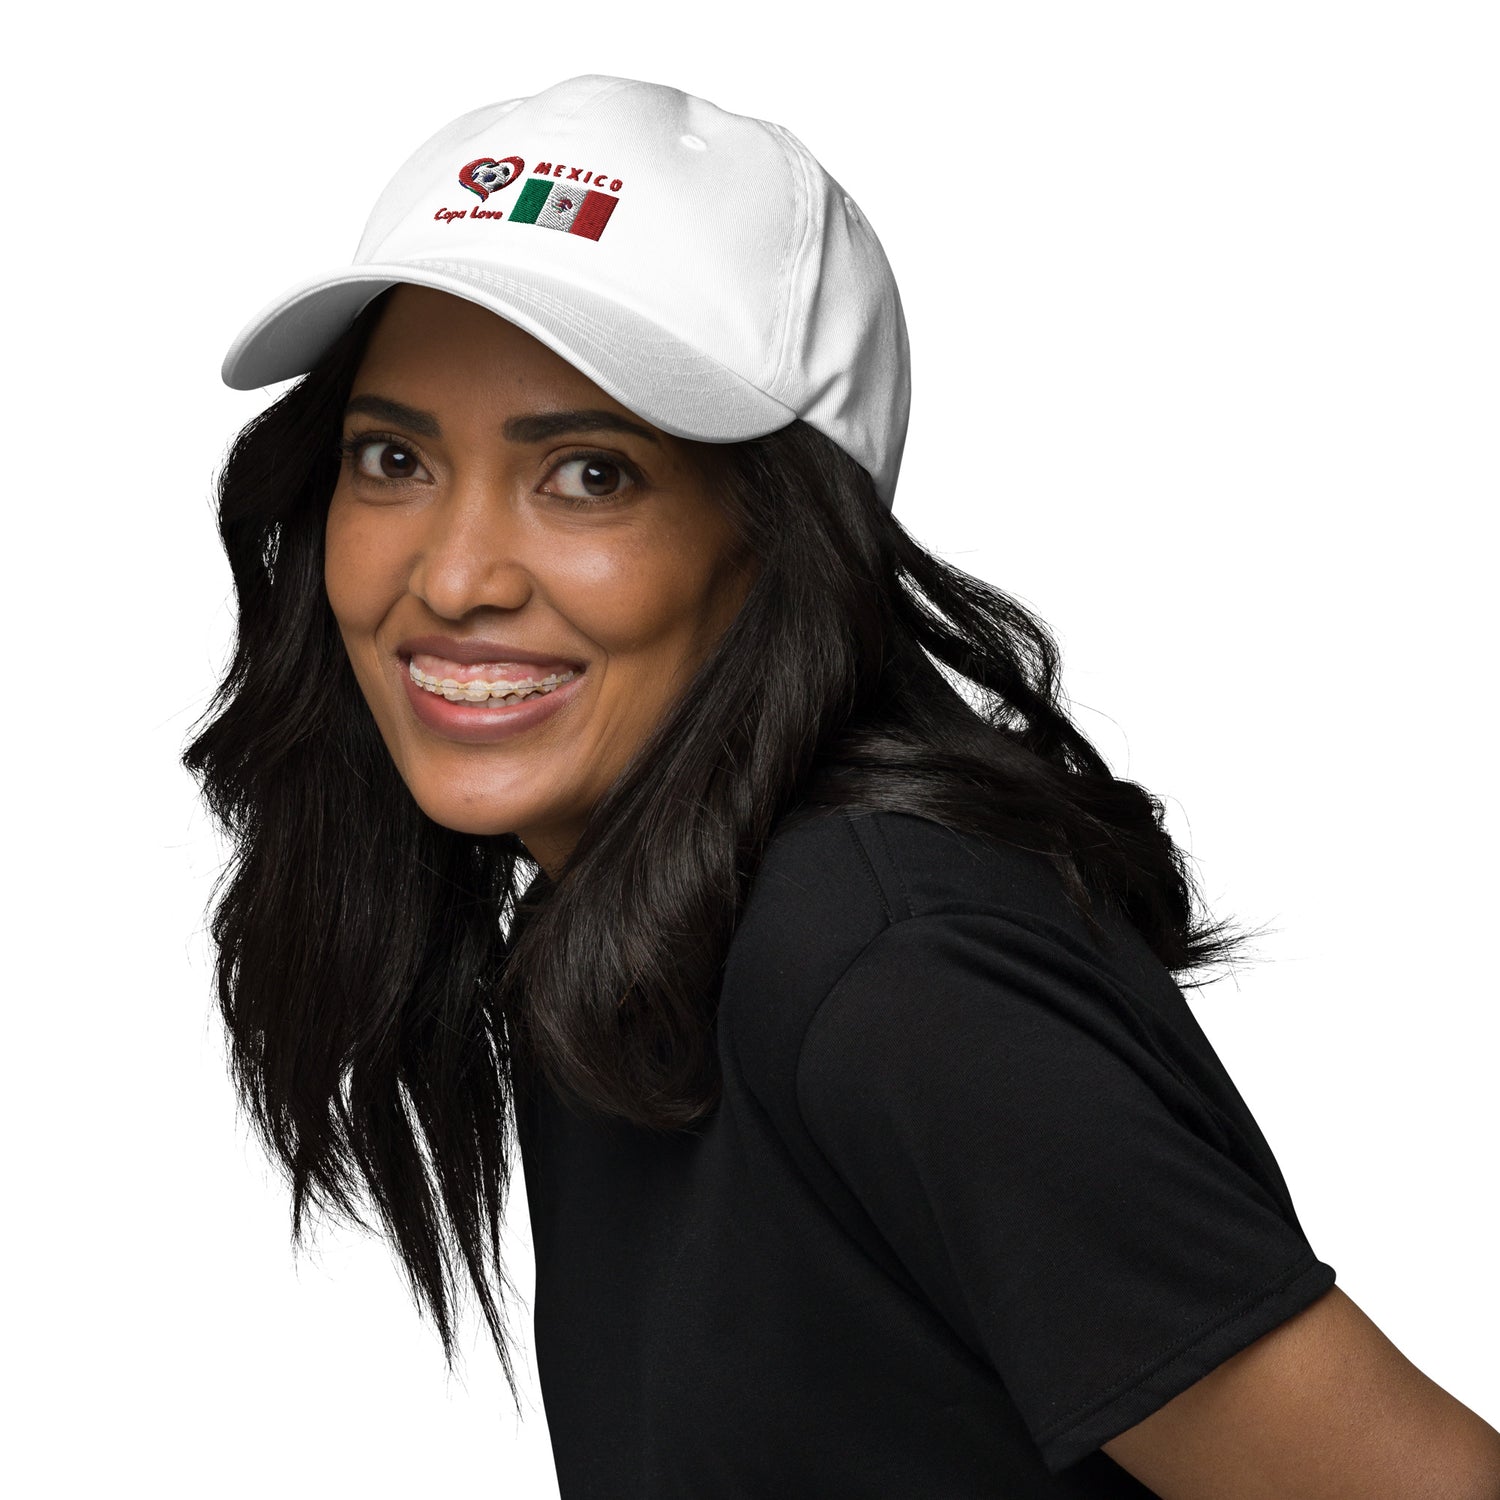 MEXICO - Cheer on your team with the ultimate Hat